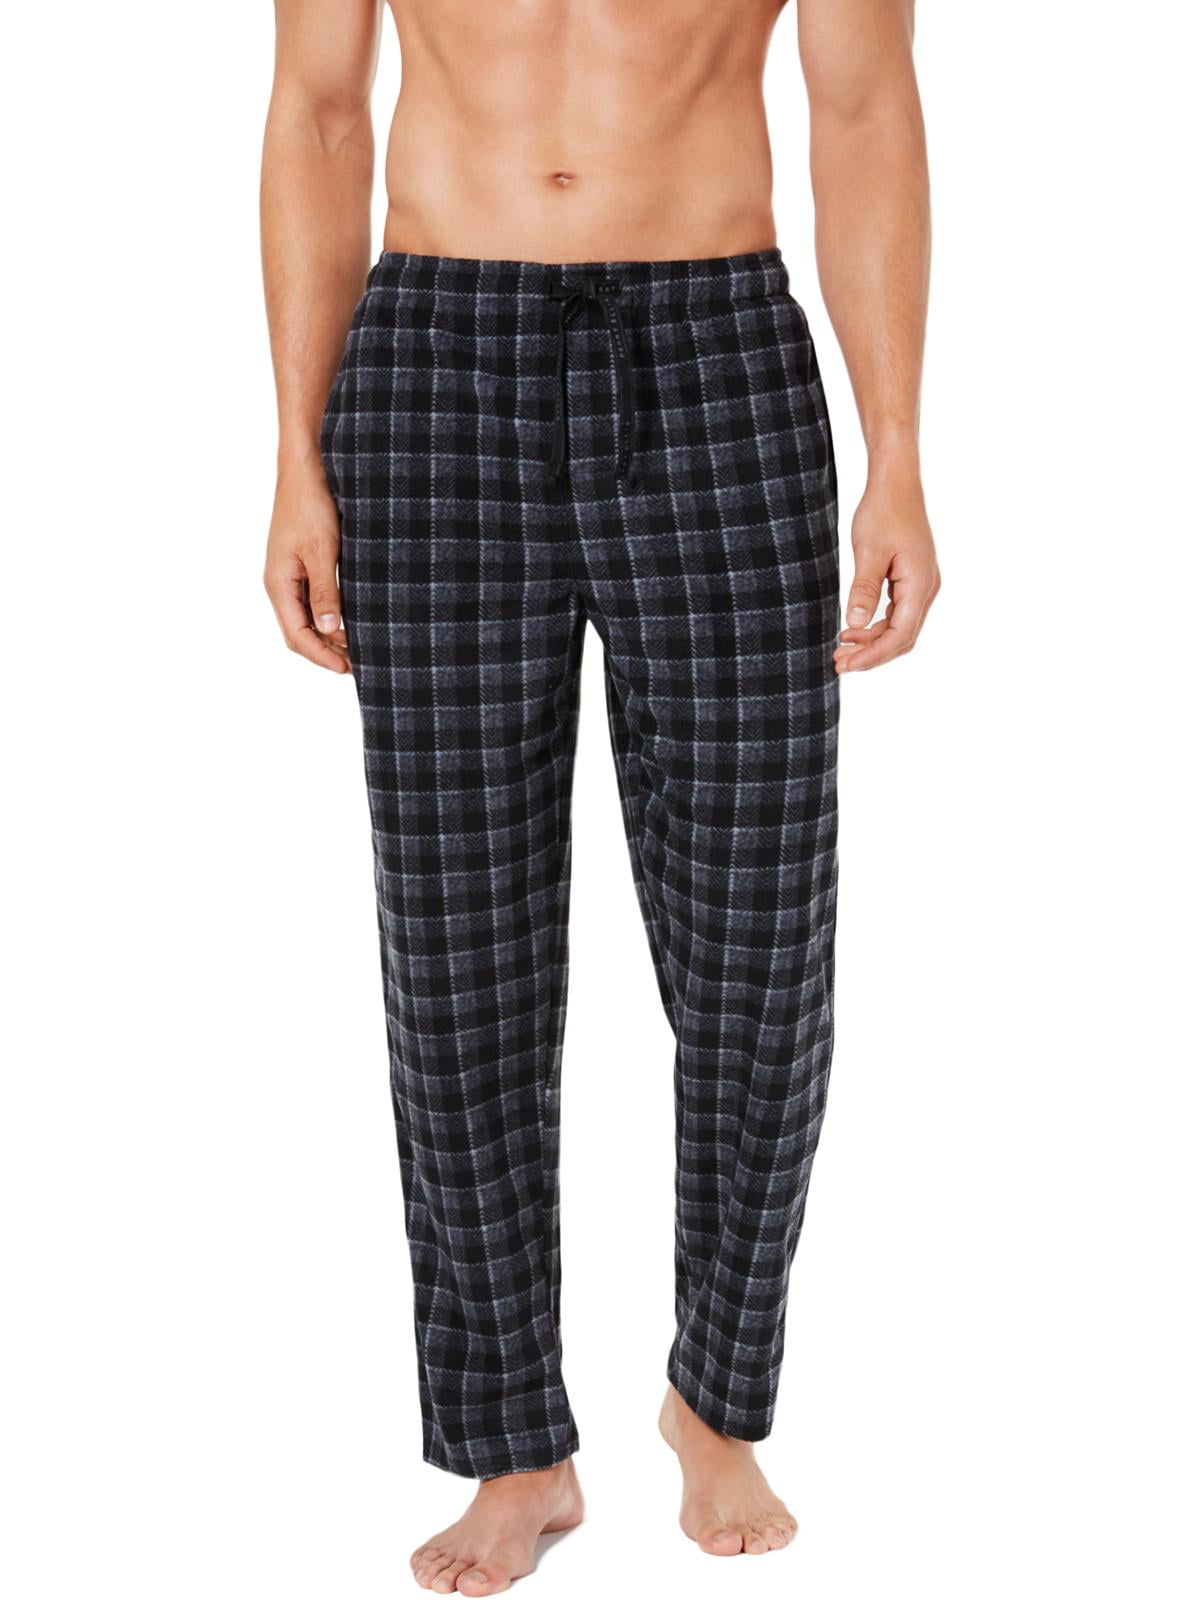 Details about  / A0027 PERRY ELLIS Men/'s Drawing String Waistband Flannel Lounge Pant 862521 New